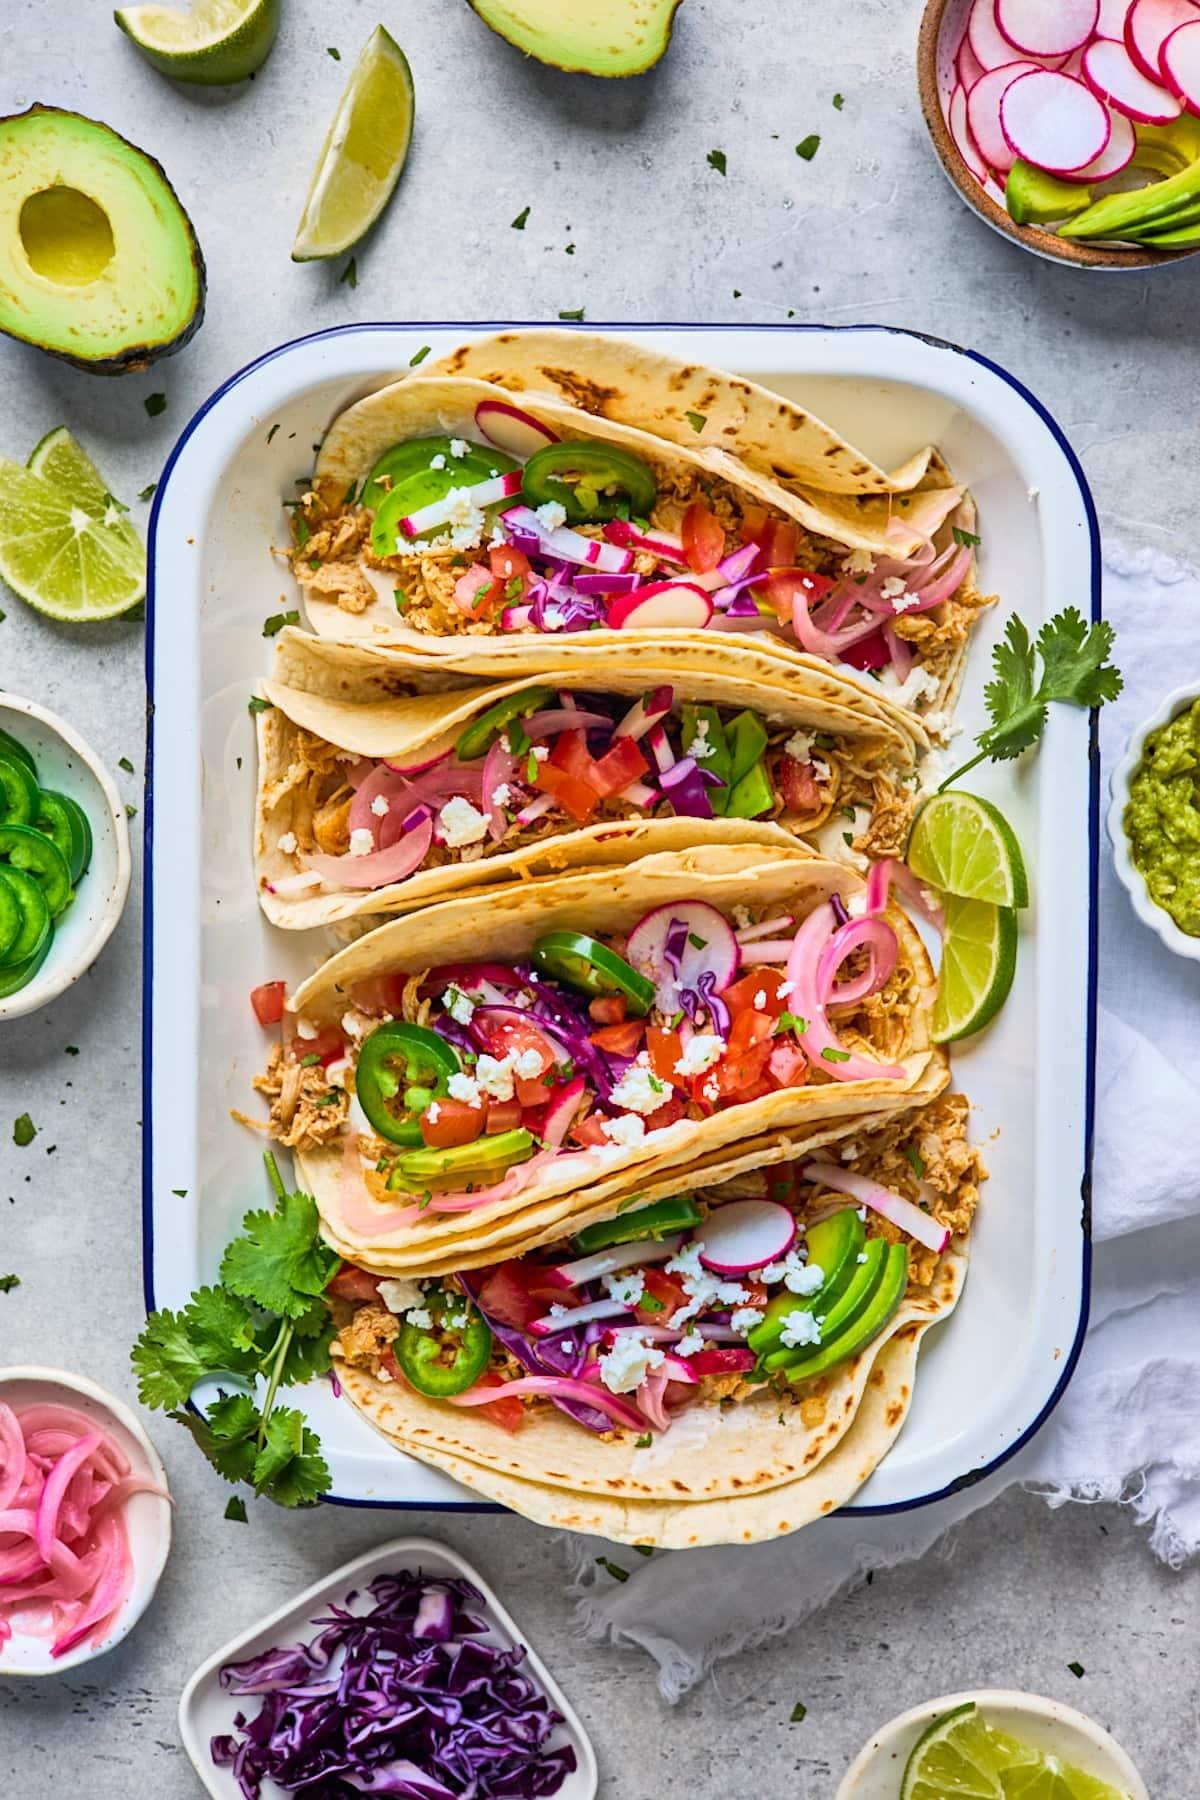 Smoky Chipotle Chicken Tacos: A Flavorful Twist on Taco Tuesday